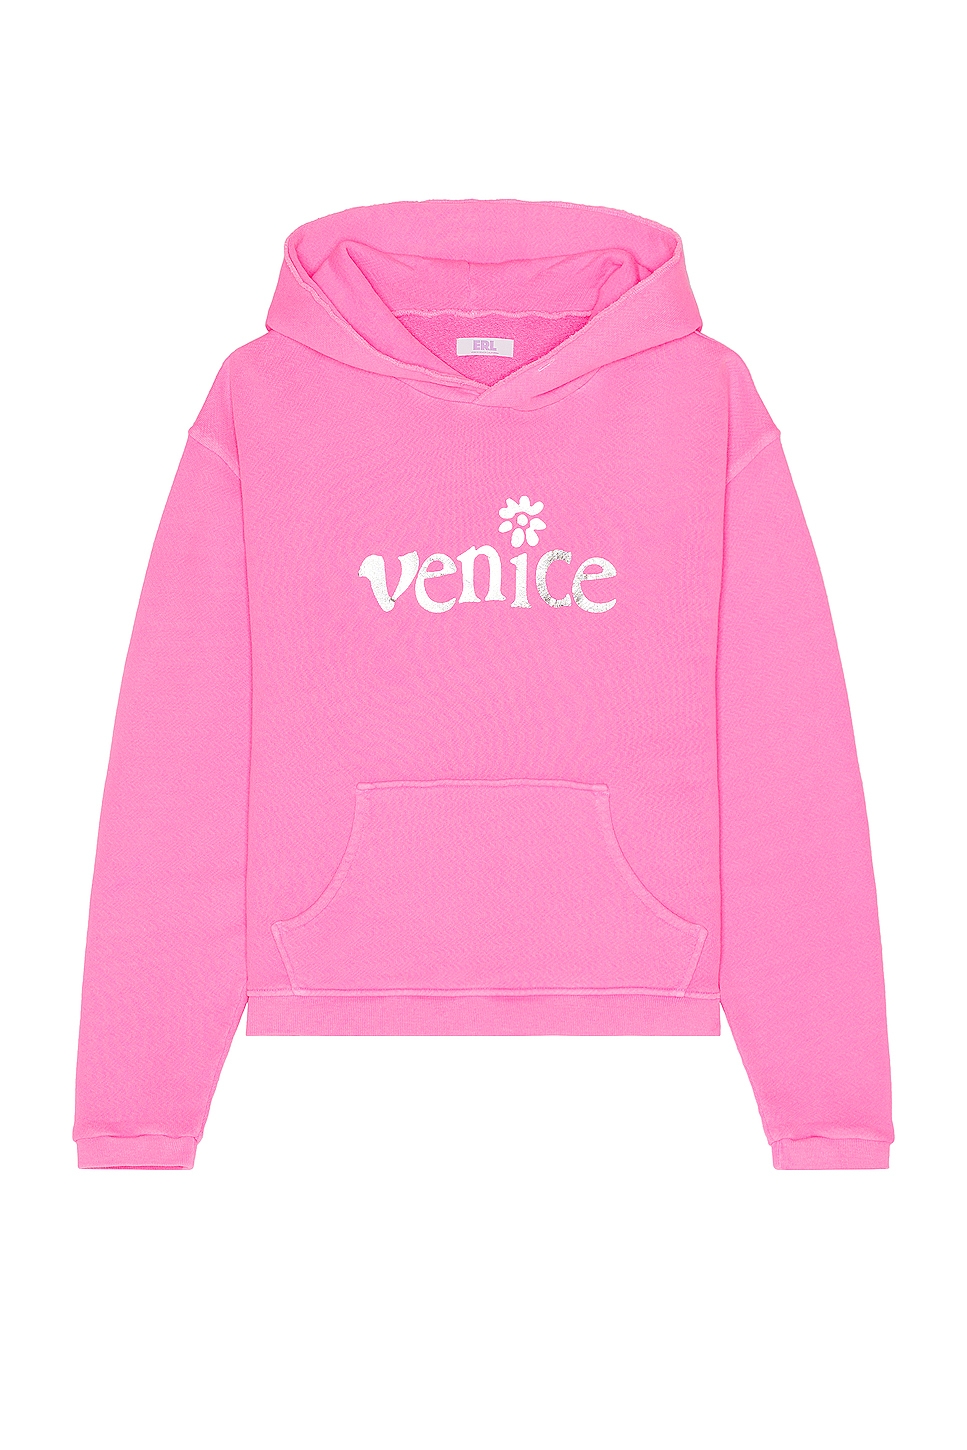 Image 1 of ERL Unisex Silver Printed Venice Hoodie Knit in PINK